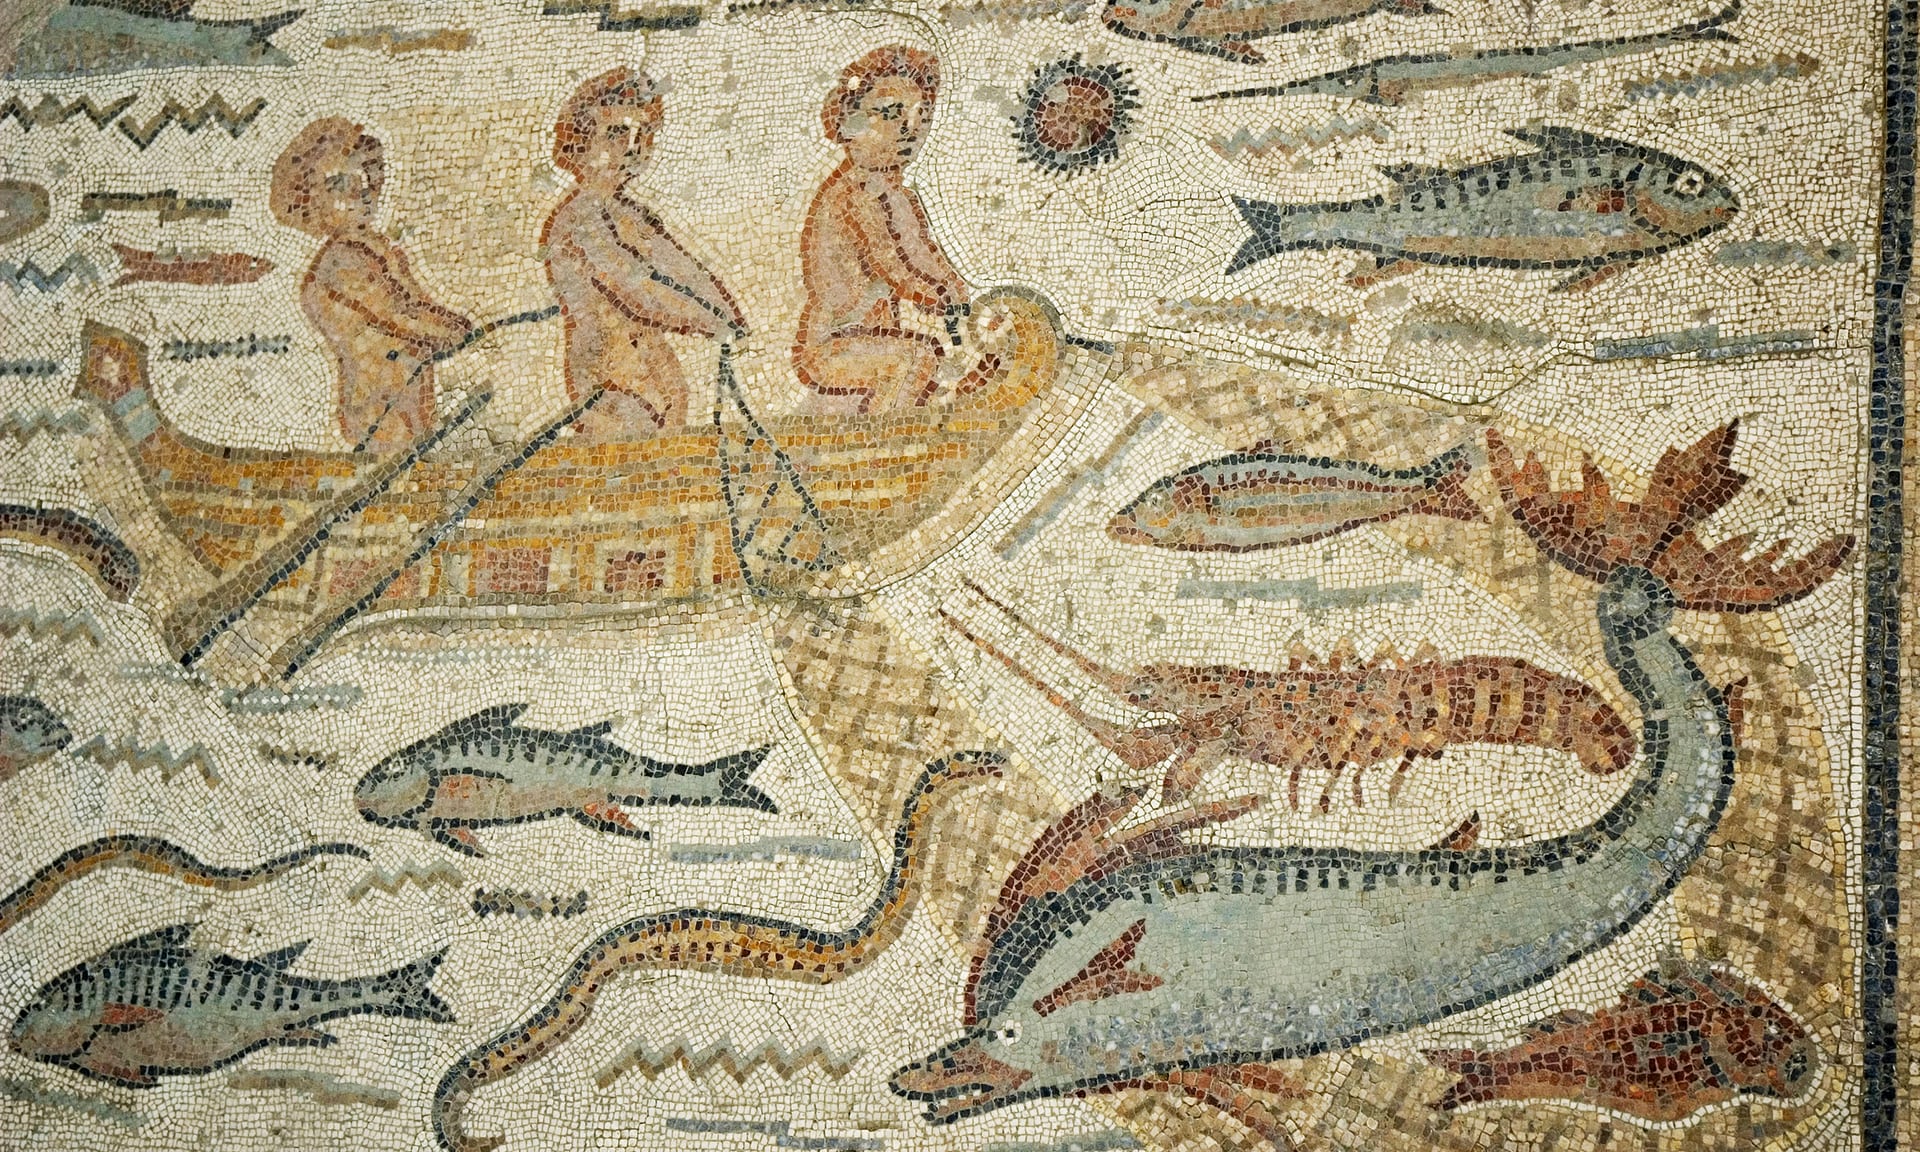 Did the Romans hunt whales?